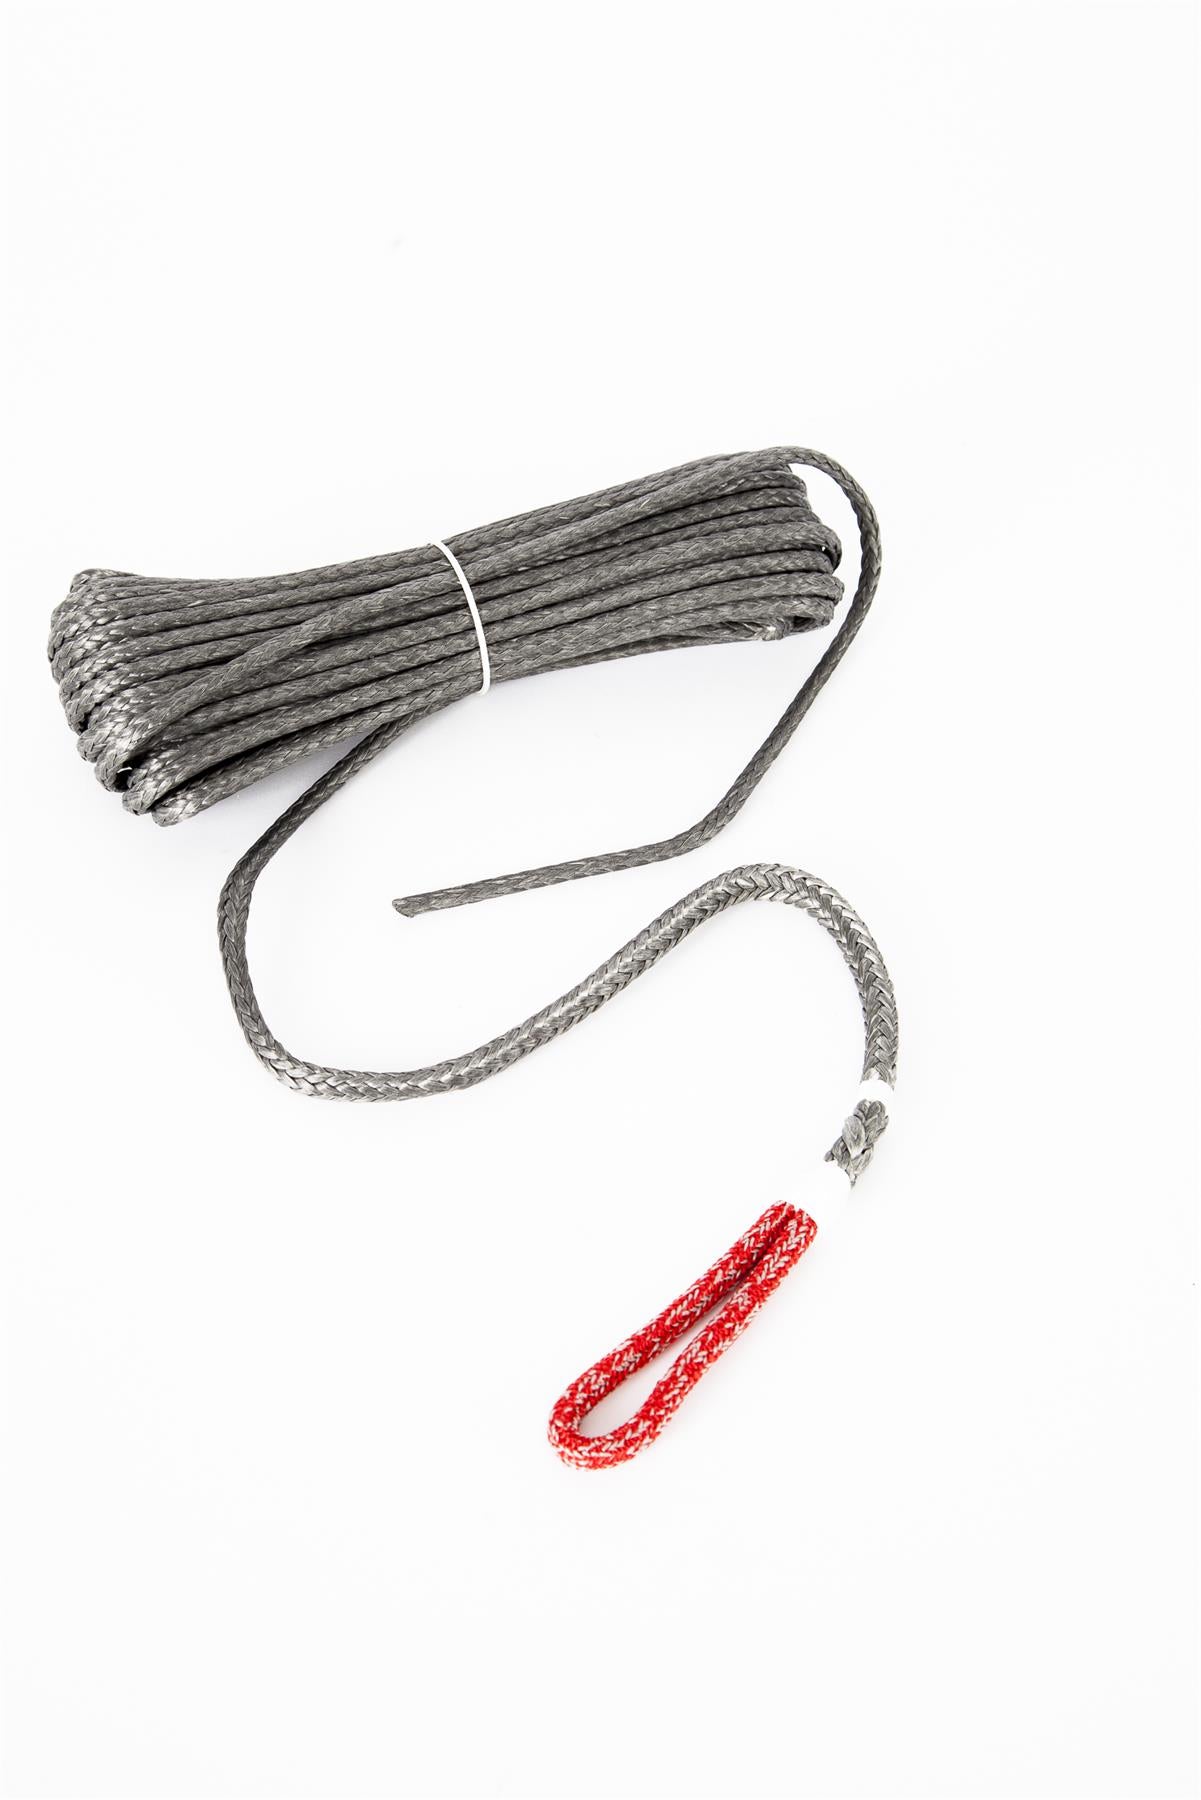 Portable Winch PCA-1450-HG Dyneema Winchlines for Off-Road Vehicle Win –  American Forestry